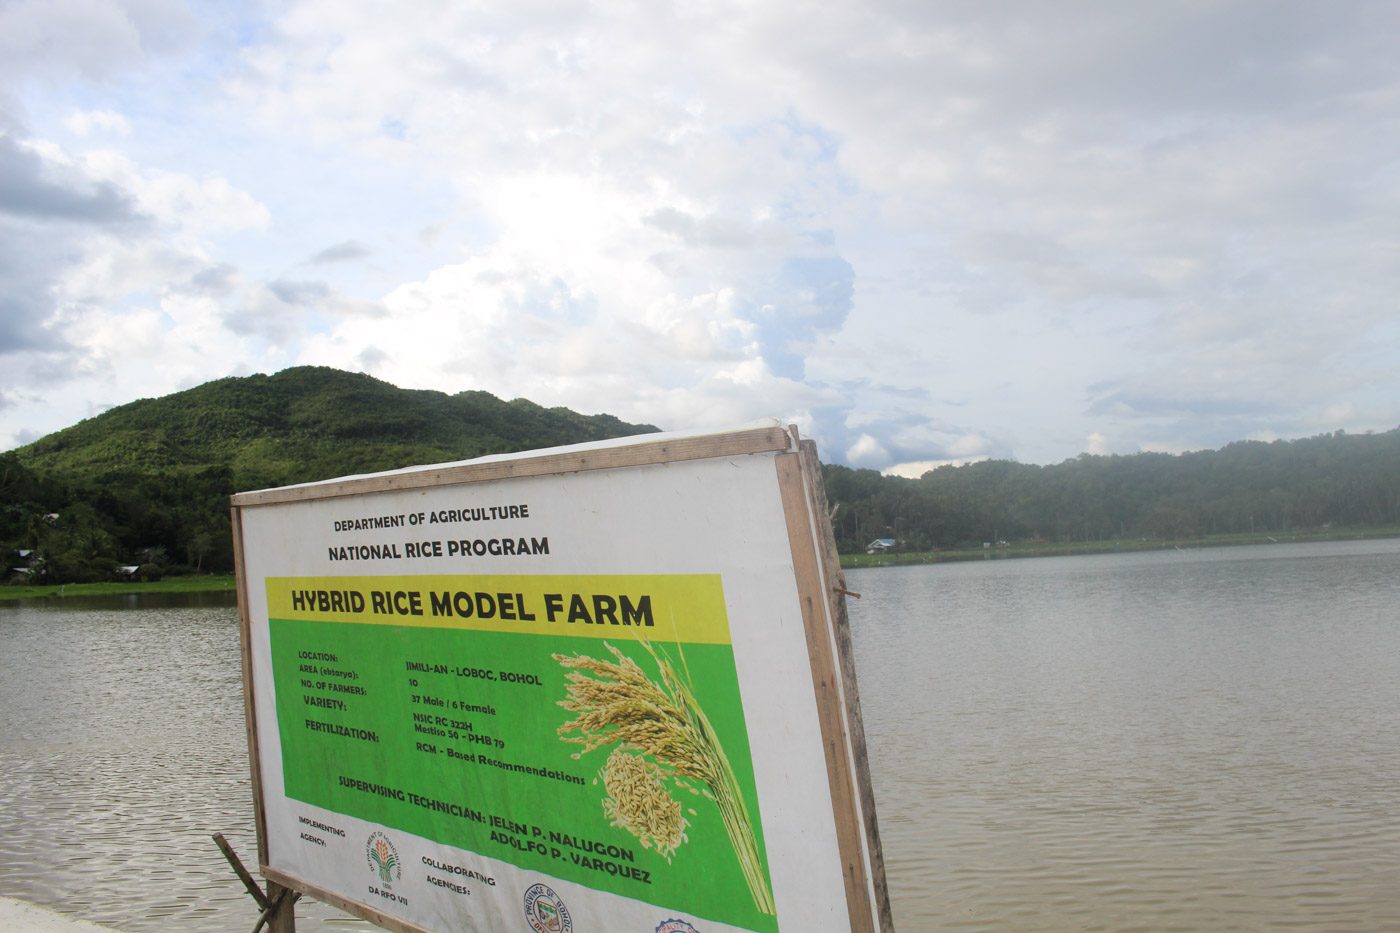 FROM FARM TO 'LAKE'. A 30-hectare hybrid rice model farm turns into a lake after Tropical Depression Agaton brought nonstop heavy rains to the province since New Year's Day. Photo by Michael Ortega Ligalig/Rappler 